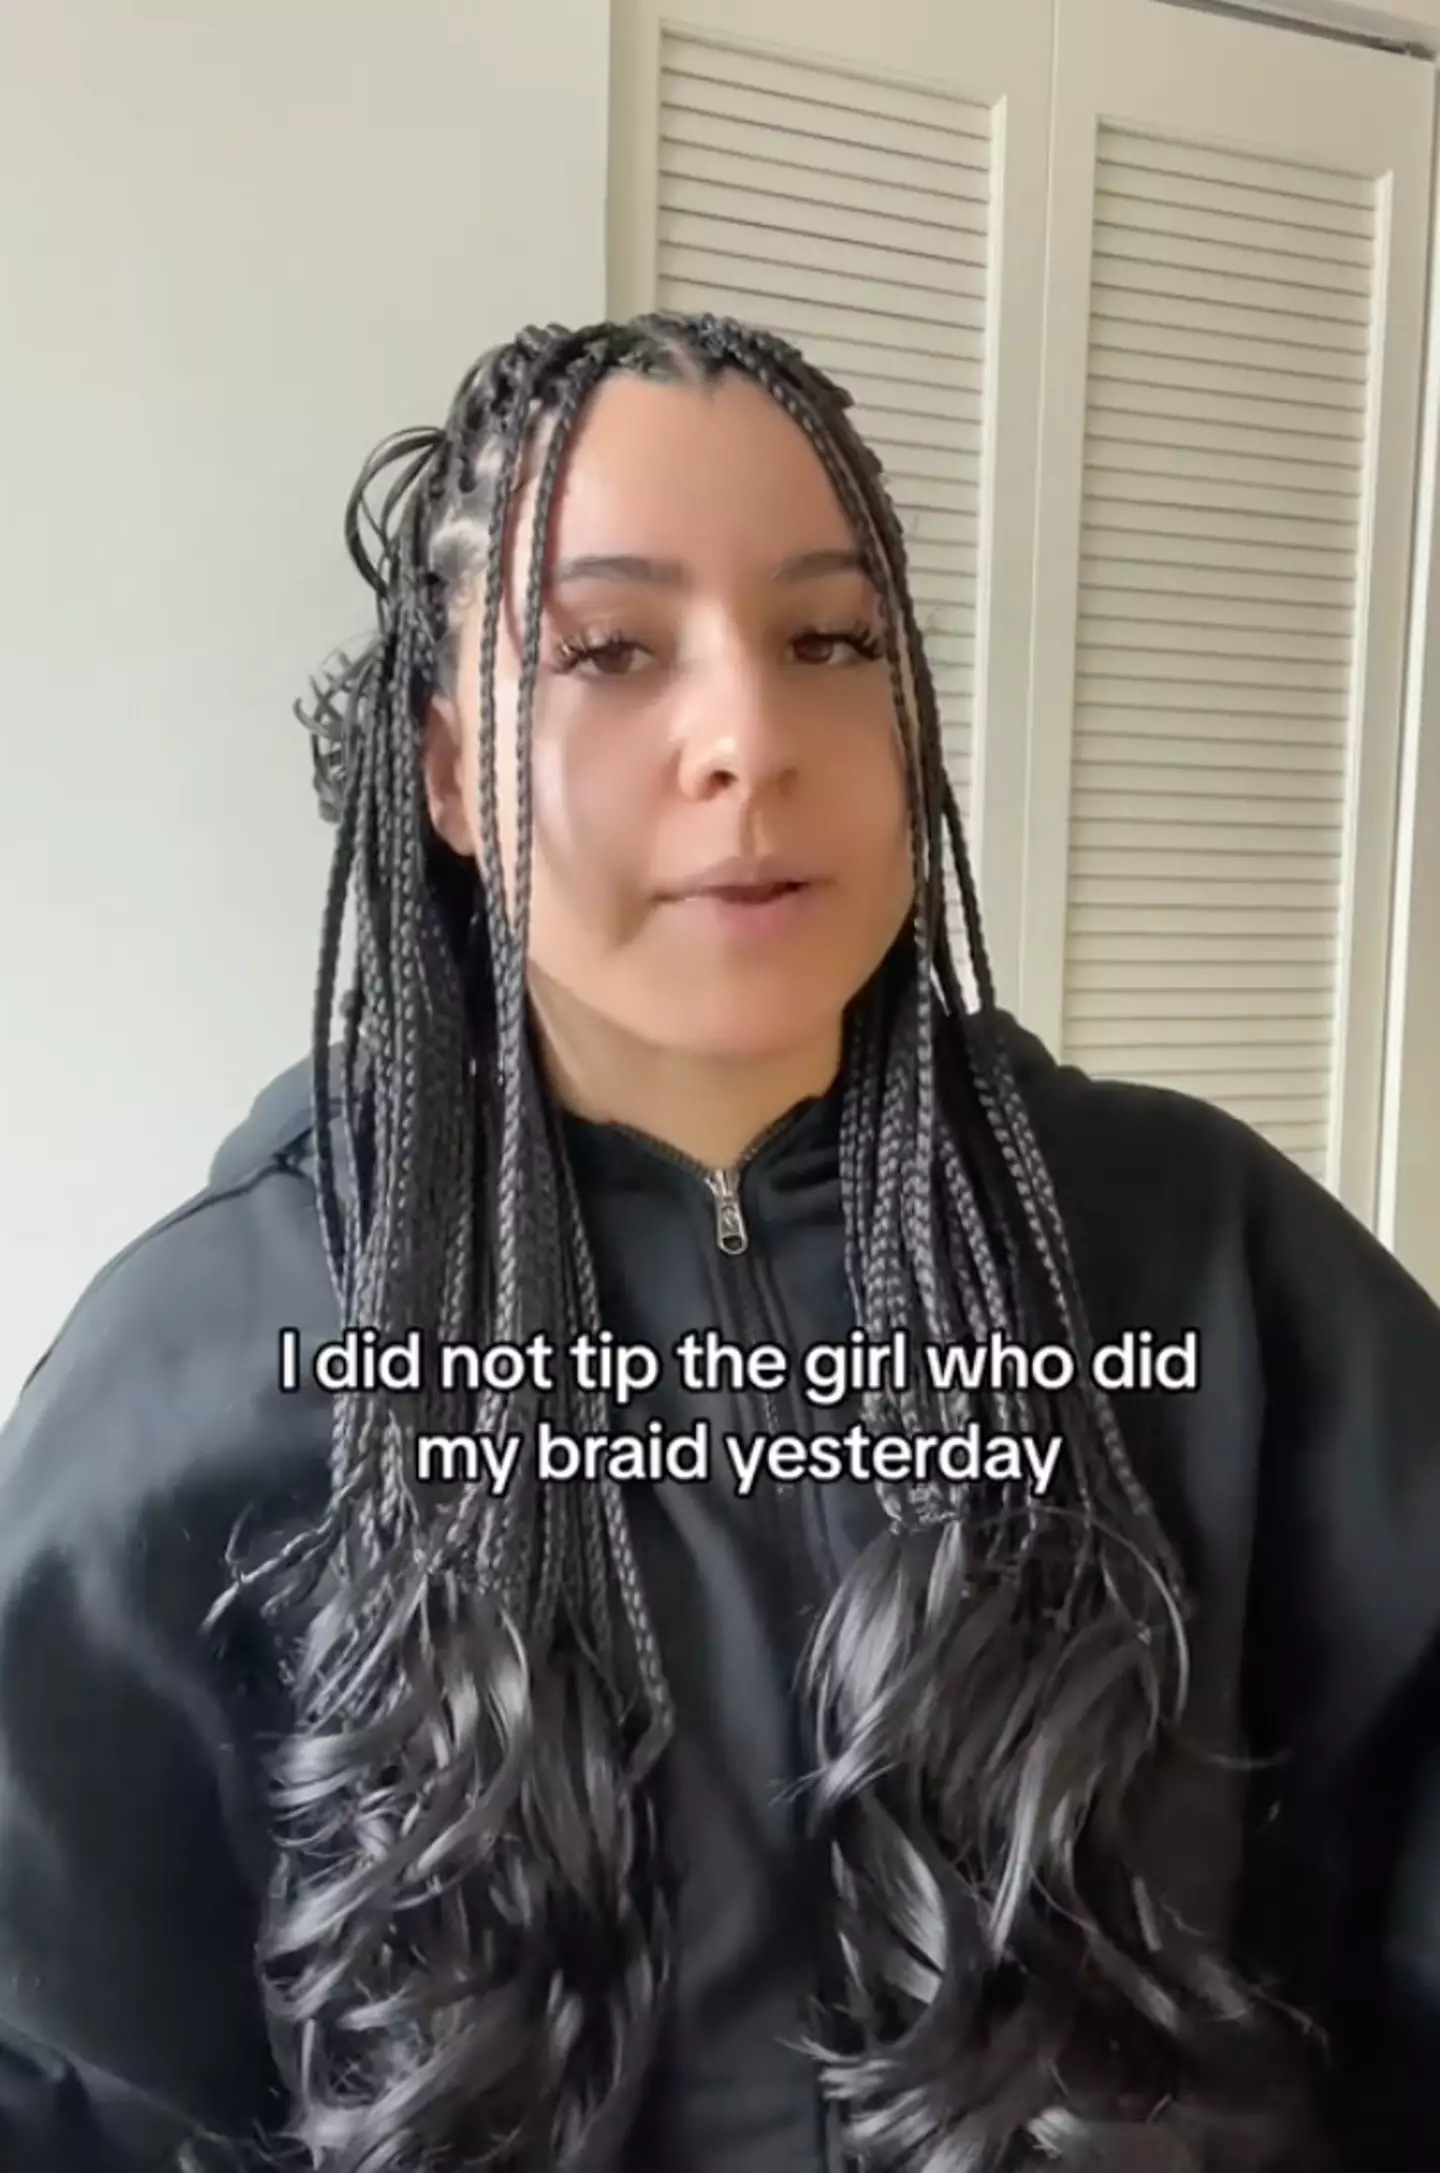 Justice said she was happy with her braids.